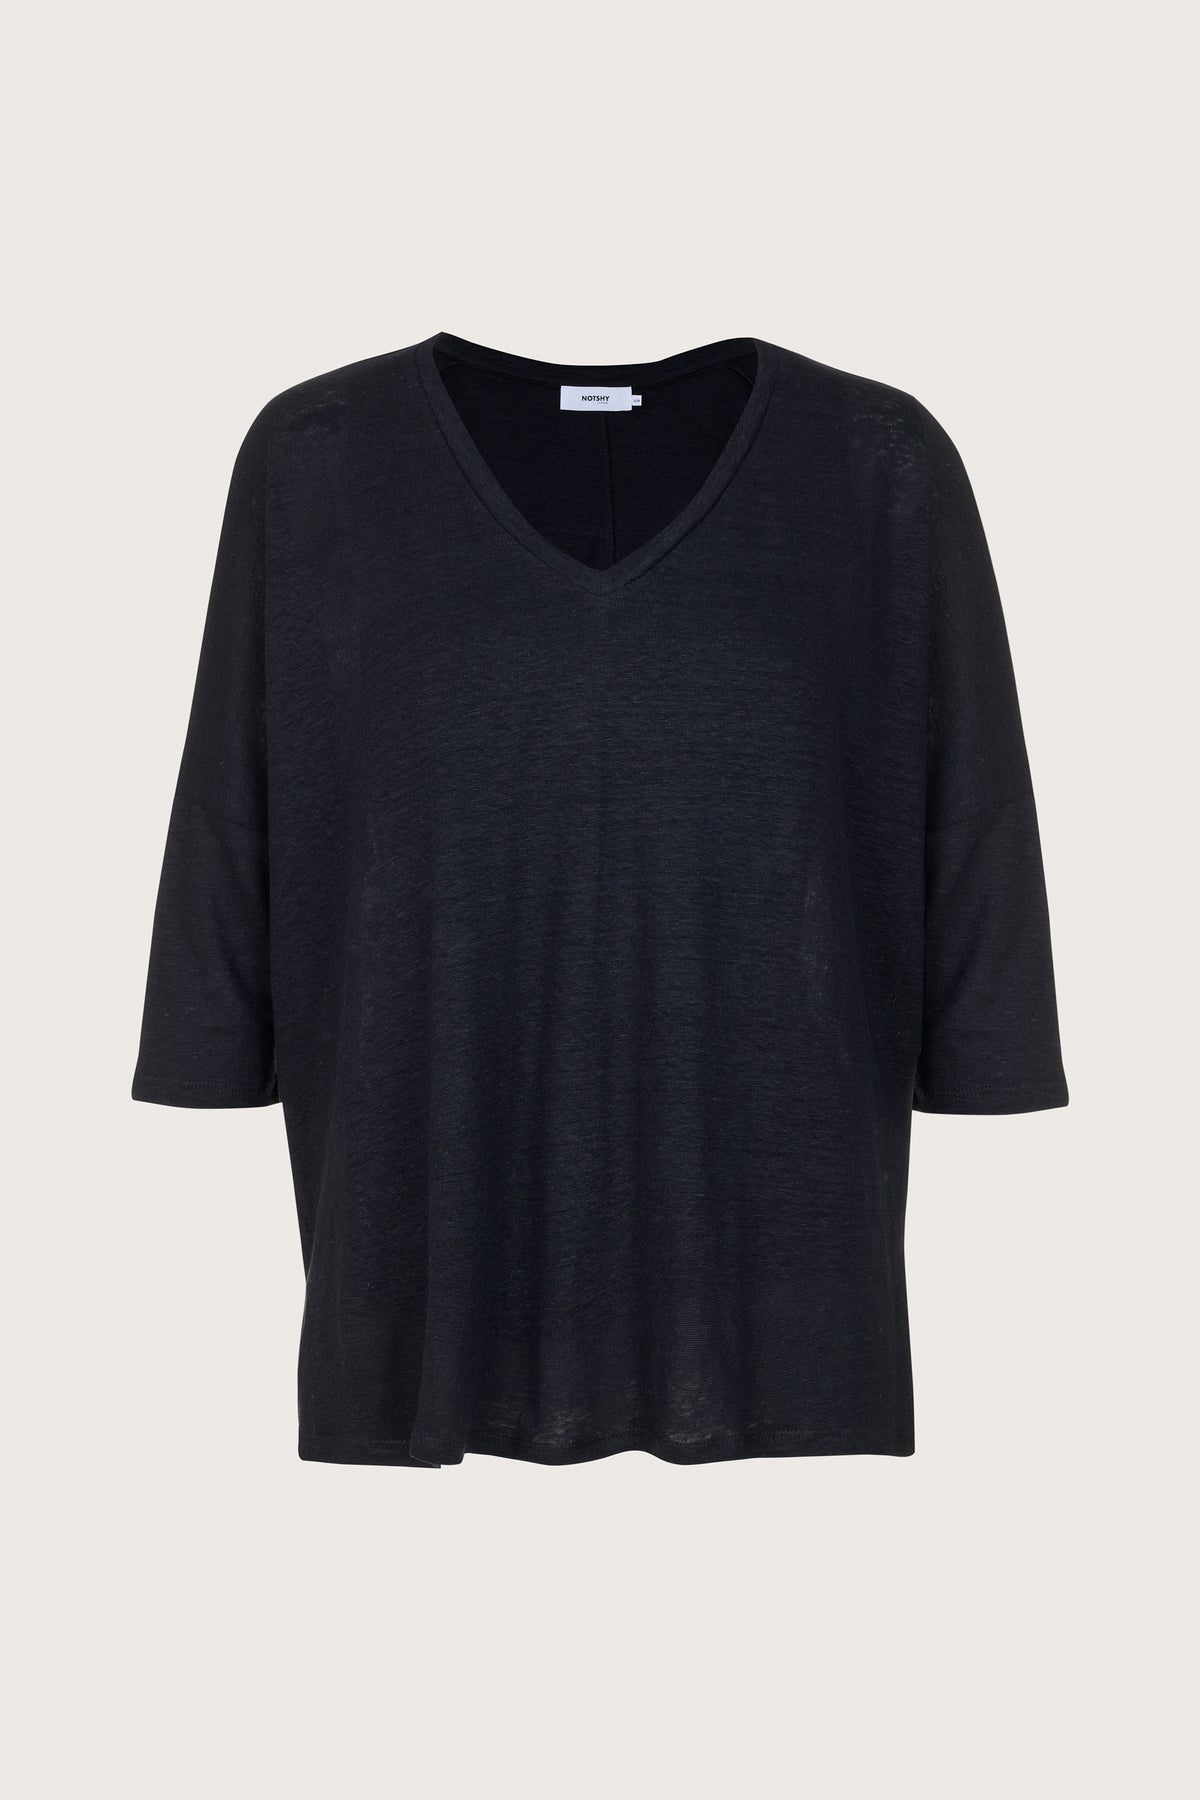 black tee with v neck